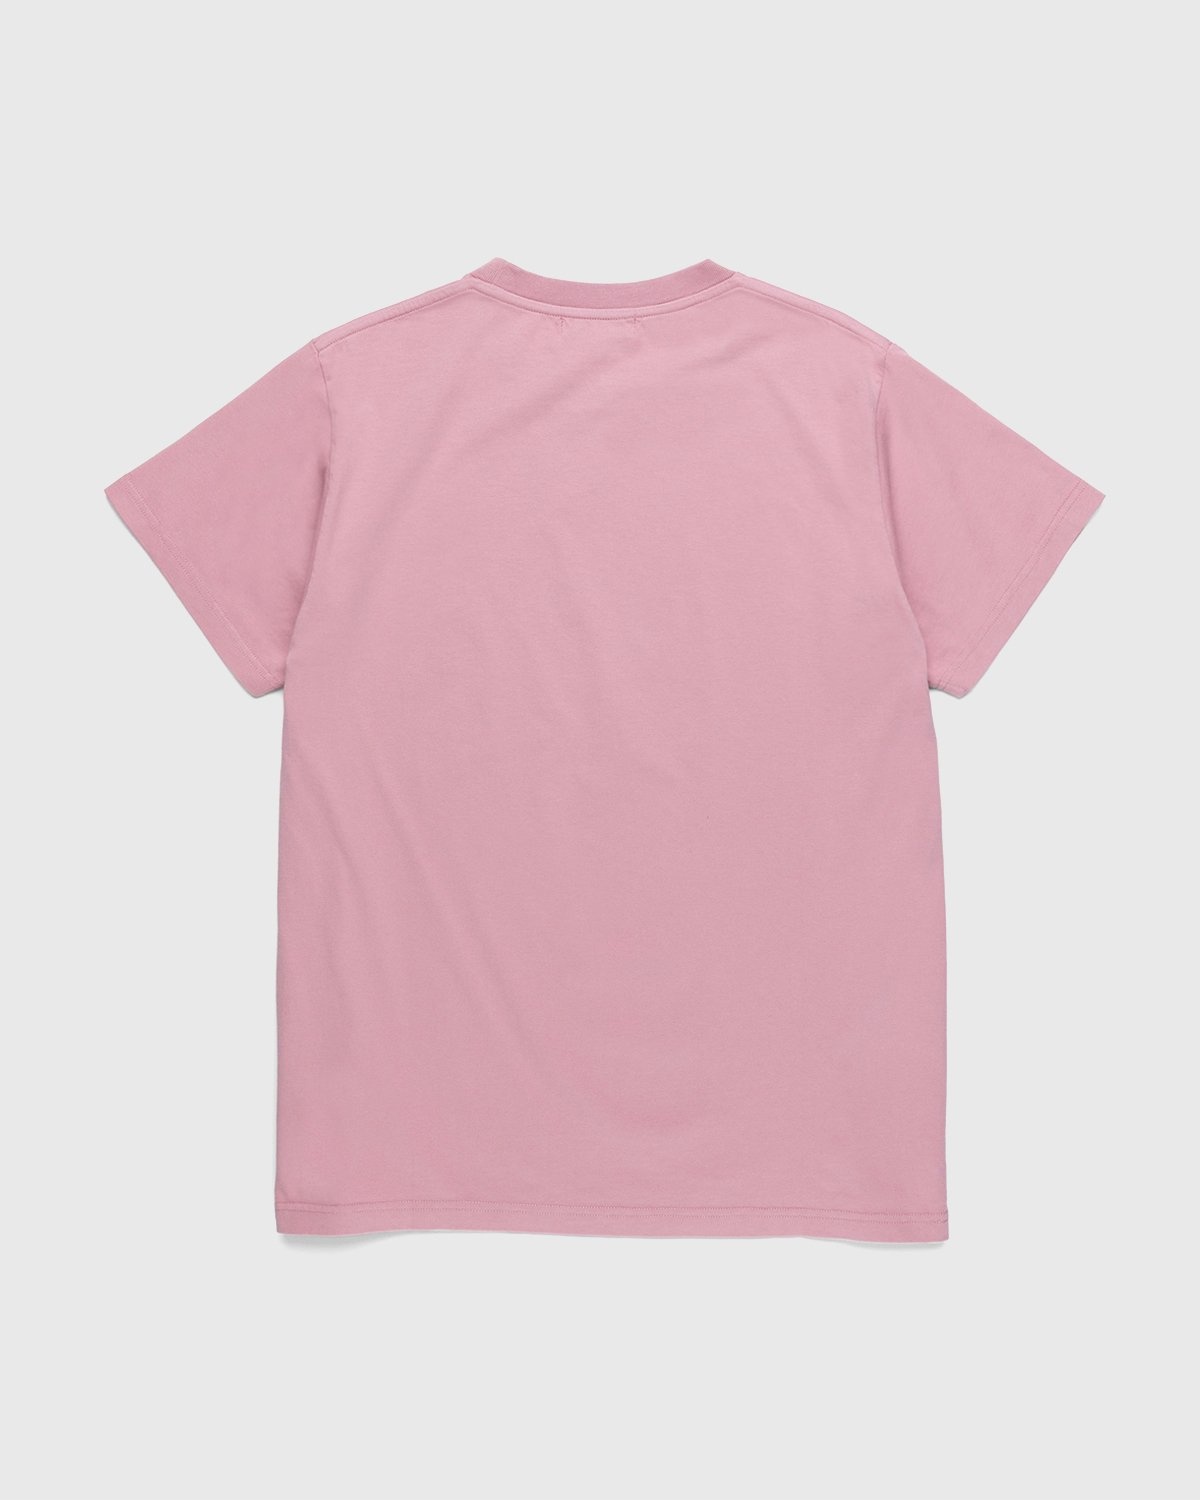 Phipps – Save The Fucking Whales T-Shirt Pink - T-Shirts - Pink - Image 2